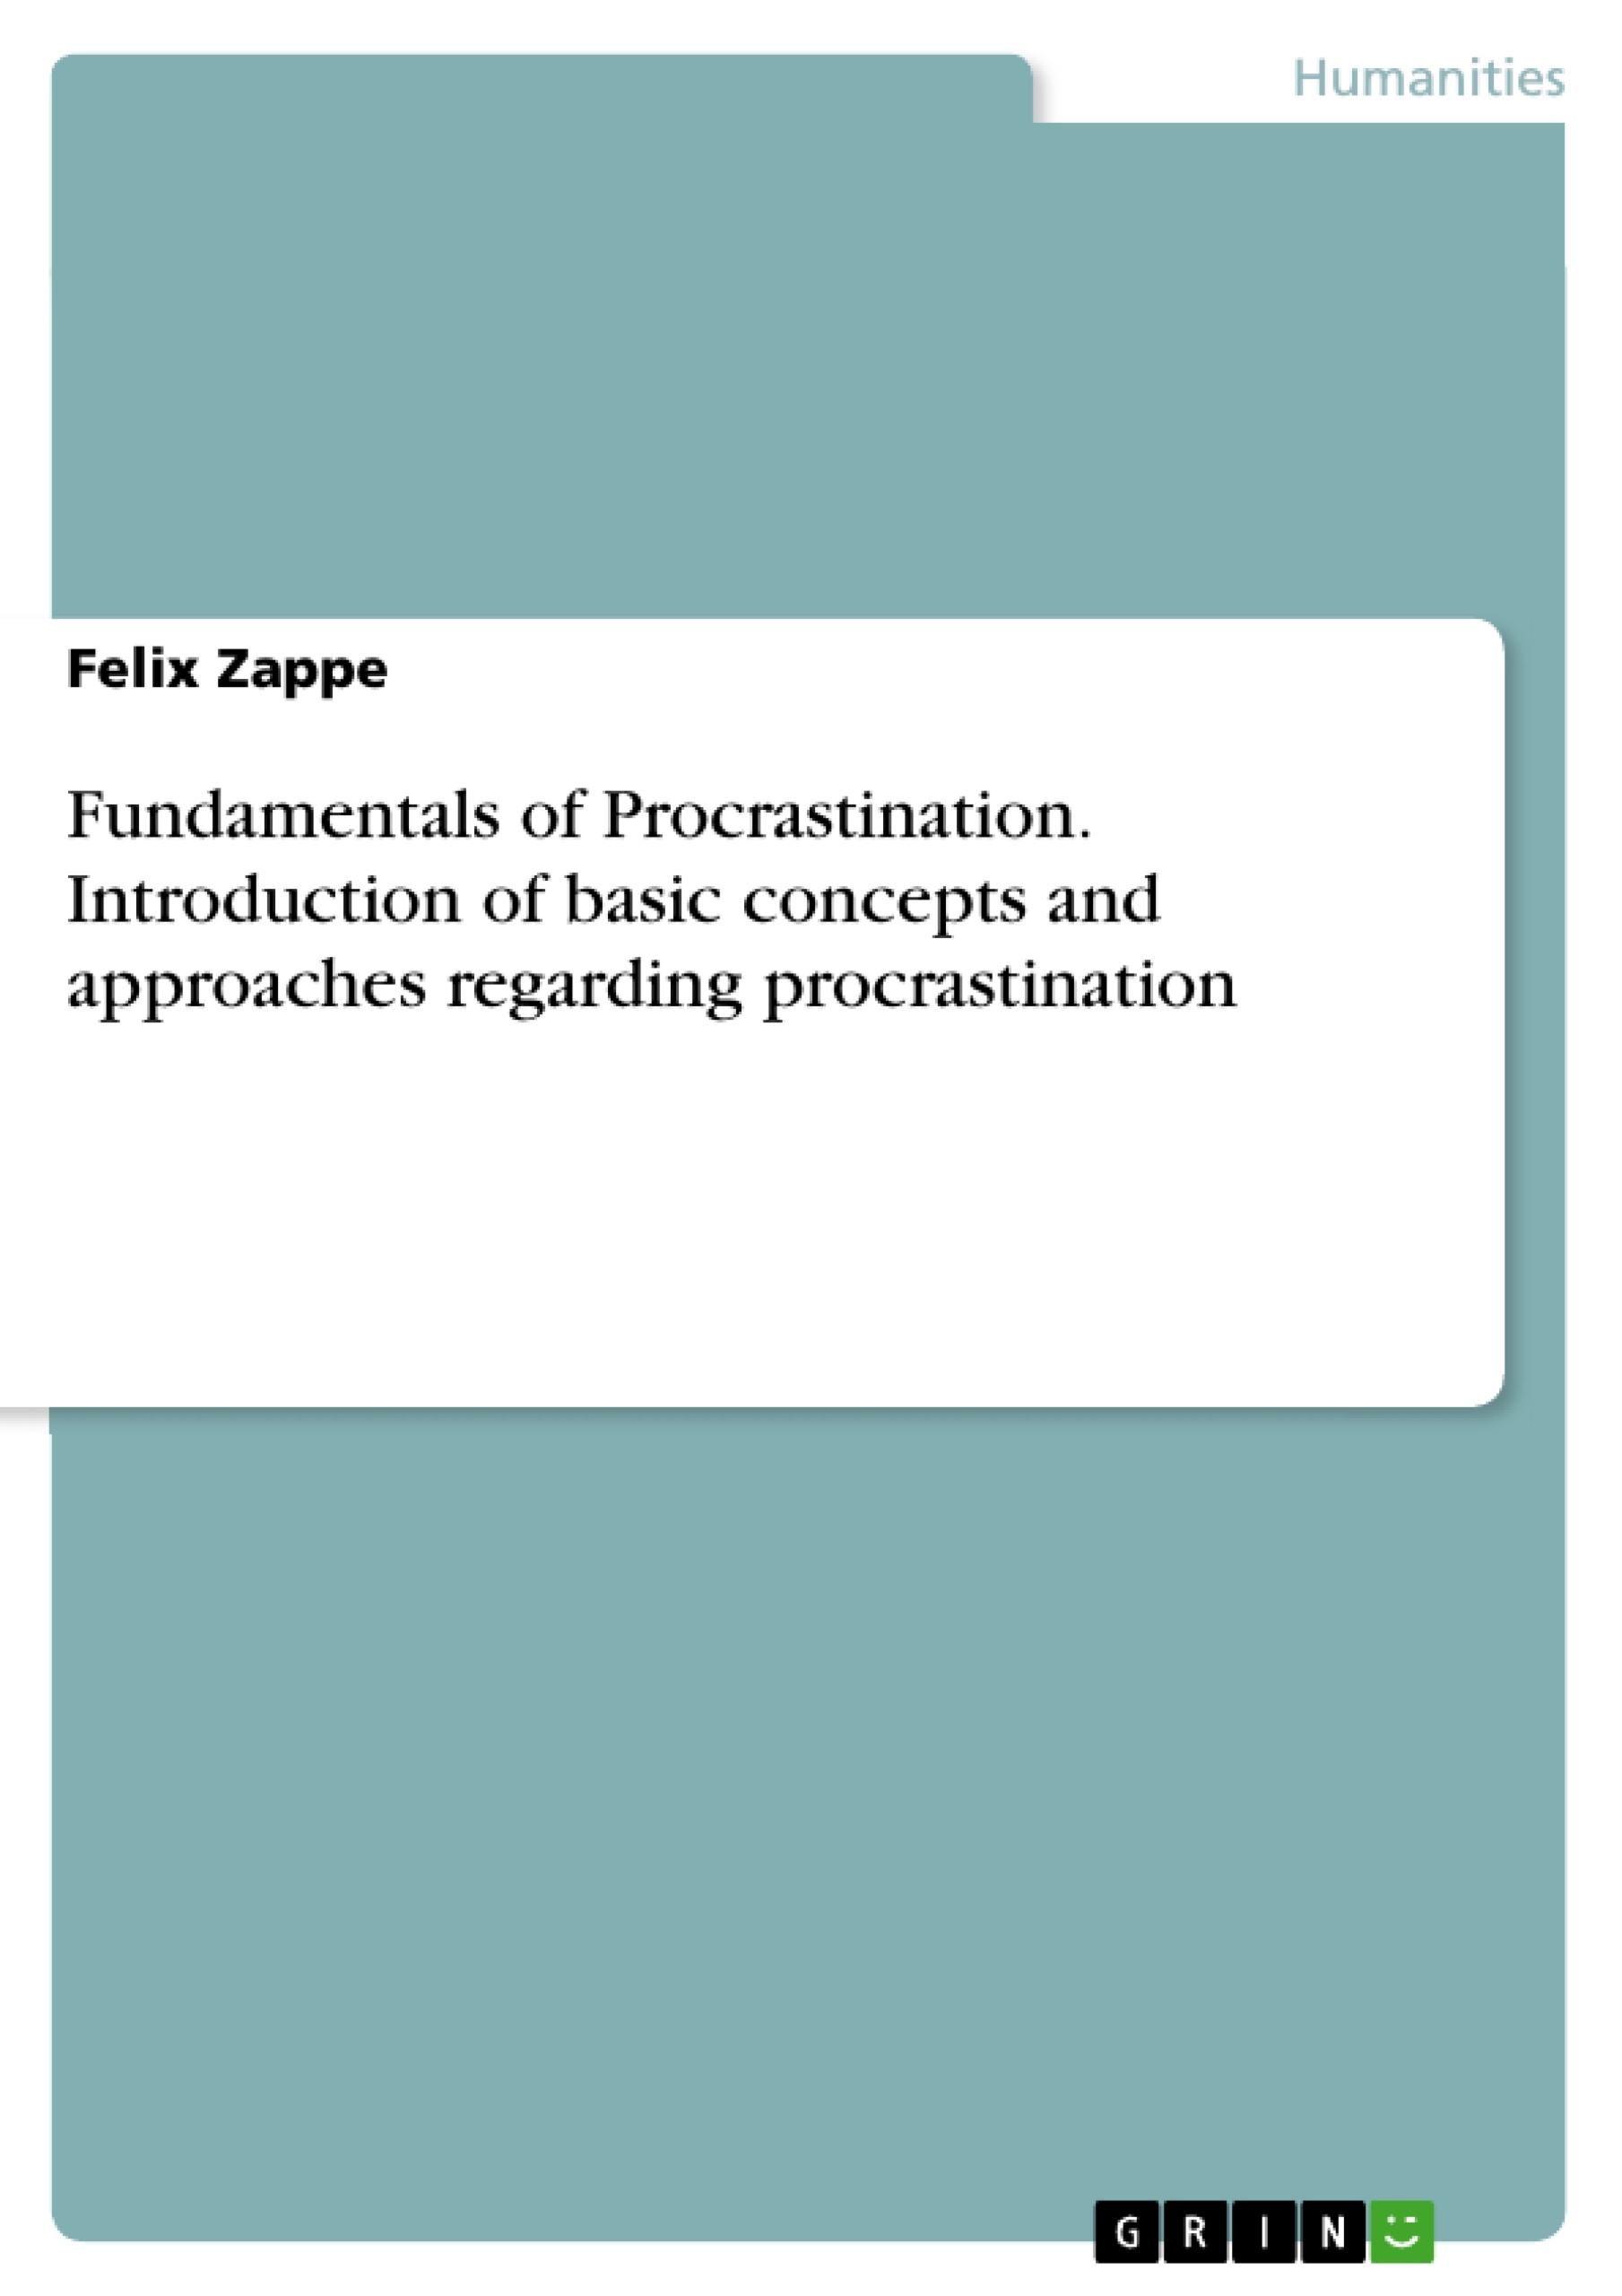 Título: Fundamentals of Procrastination. Introduction of basic concepts and approaches regarding procrastination